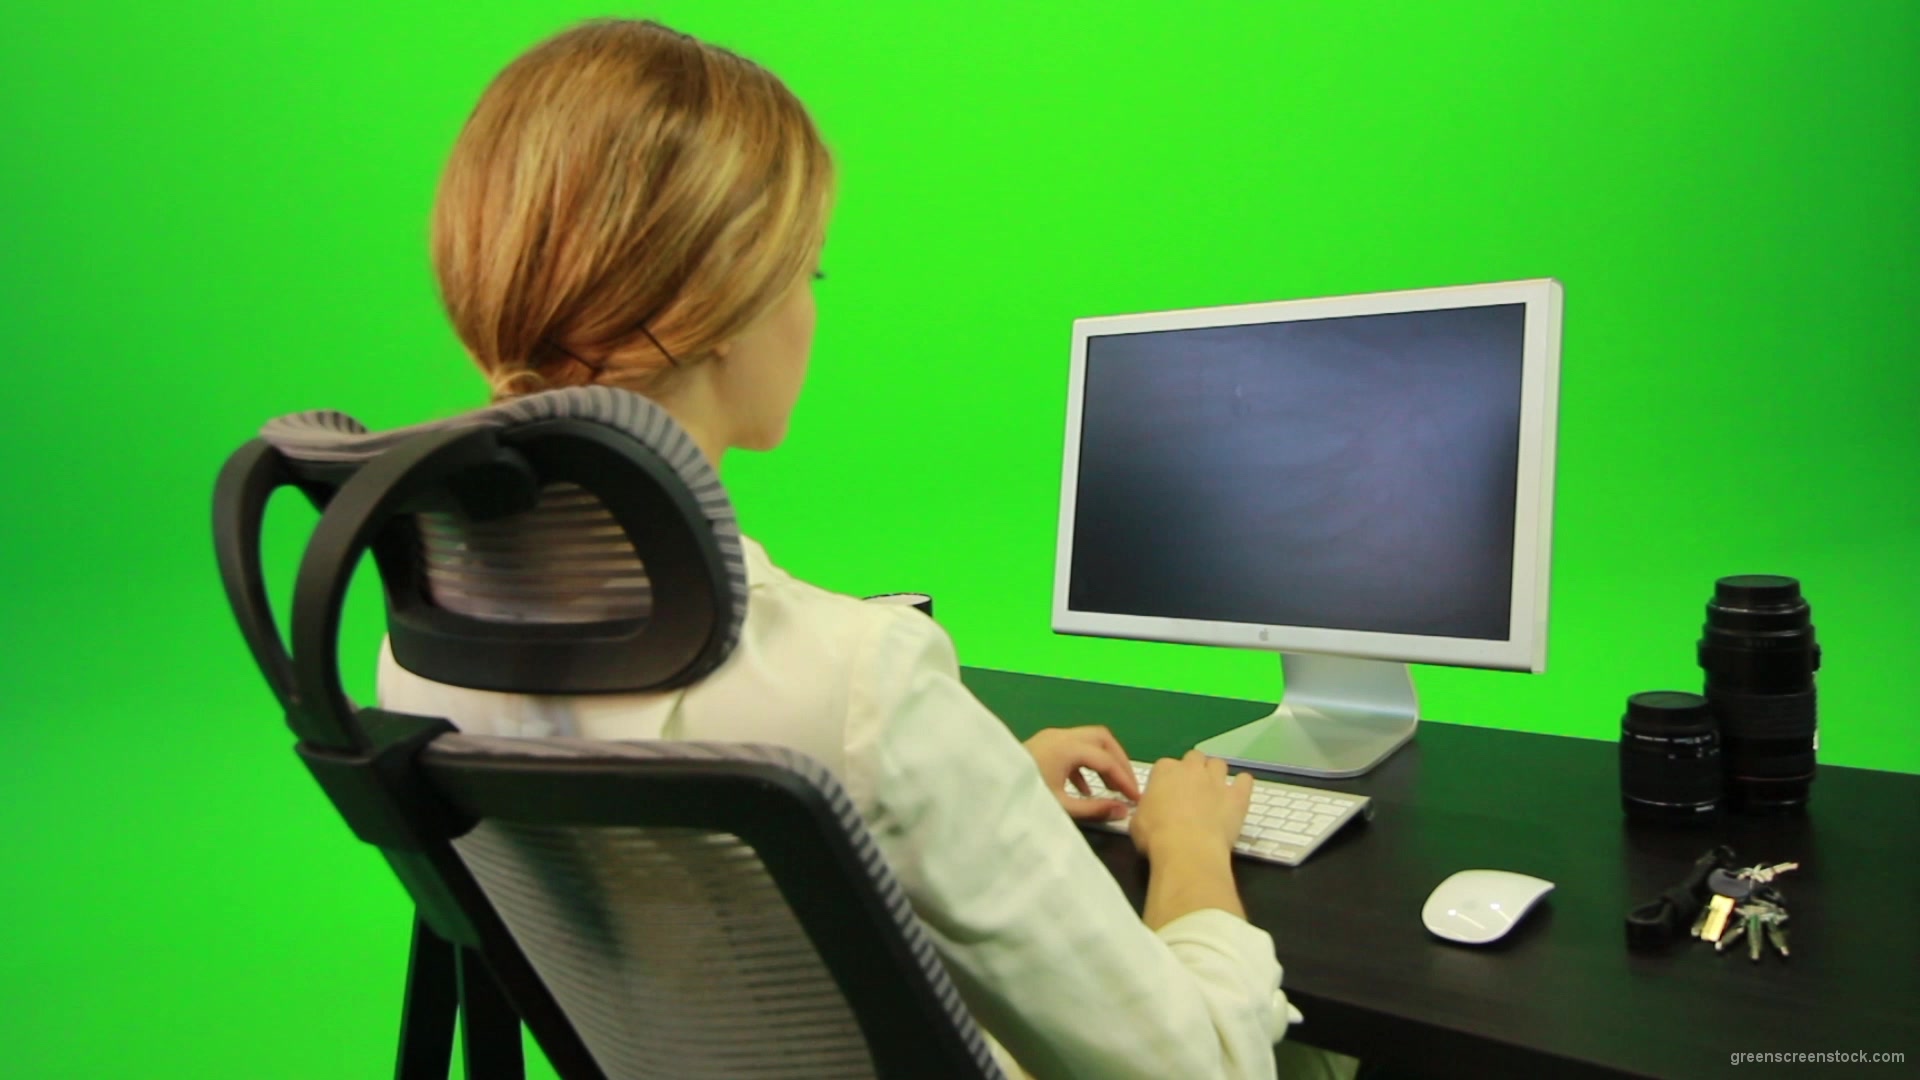 Woman-Working-on-the-Computer-5-Green-Screen-Footage_002 Green Screen Stock